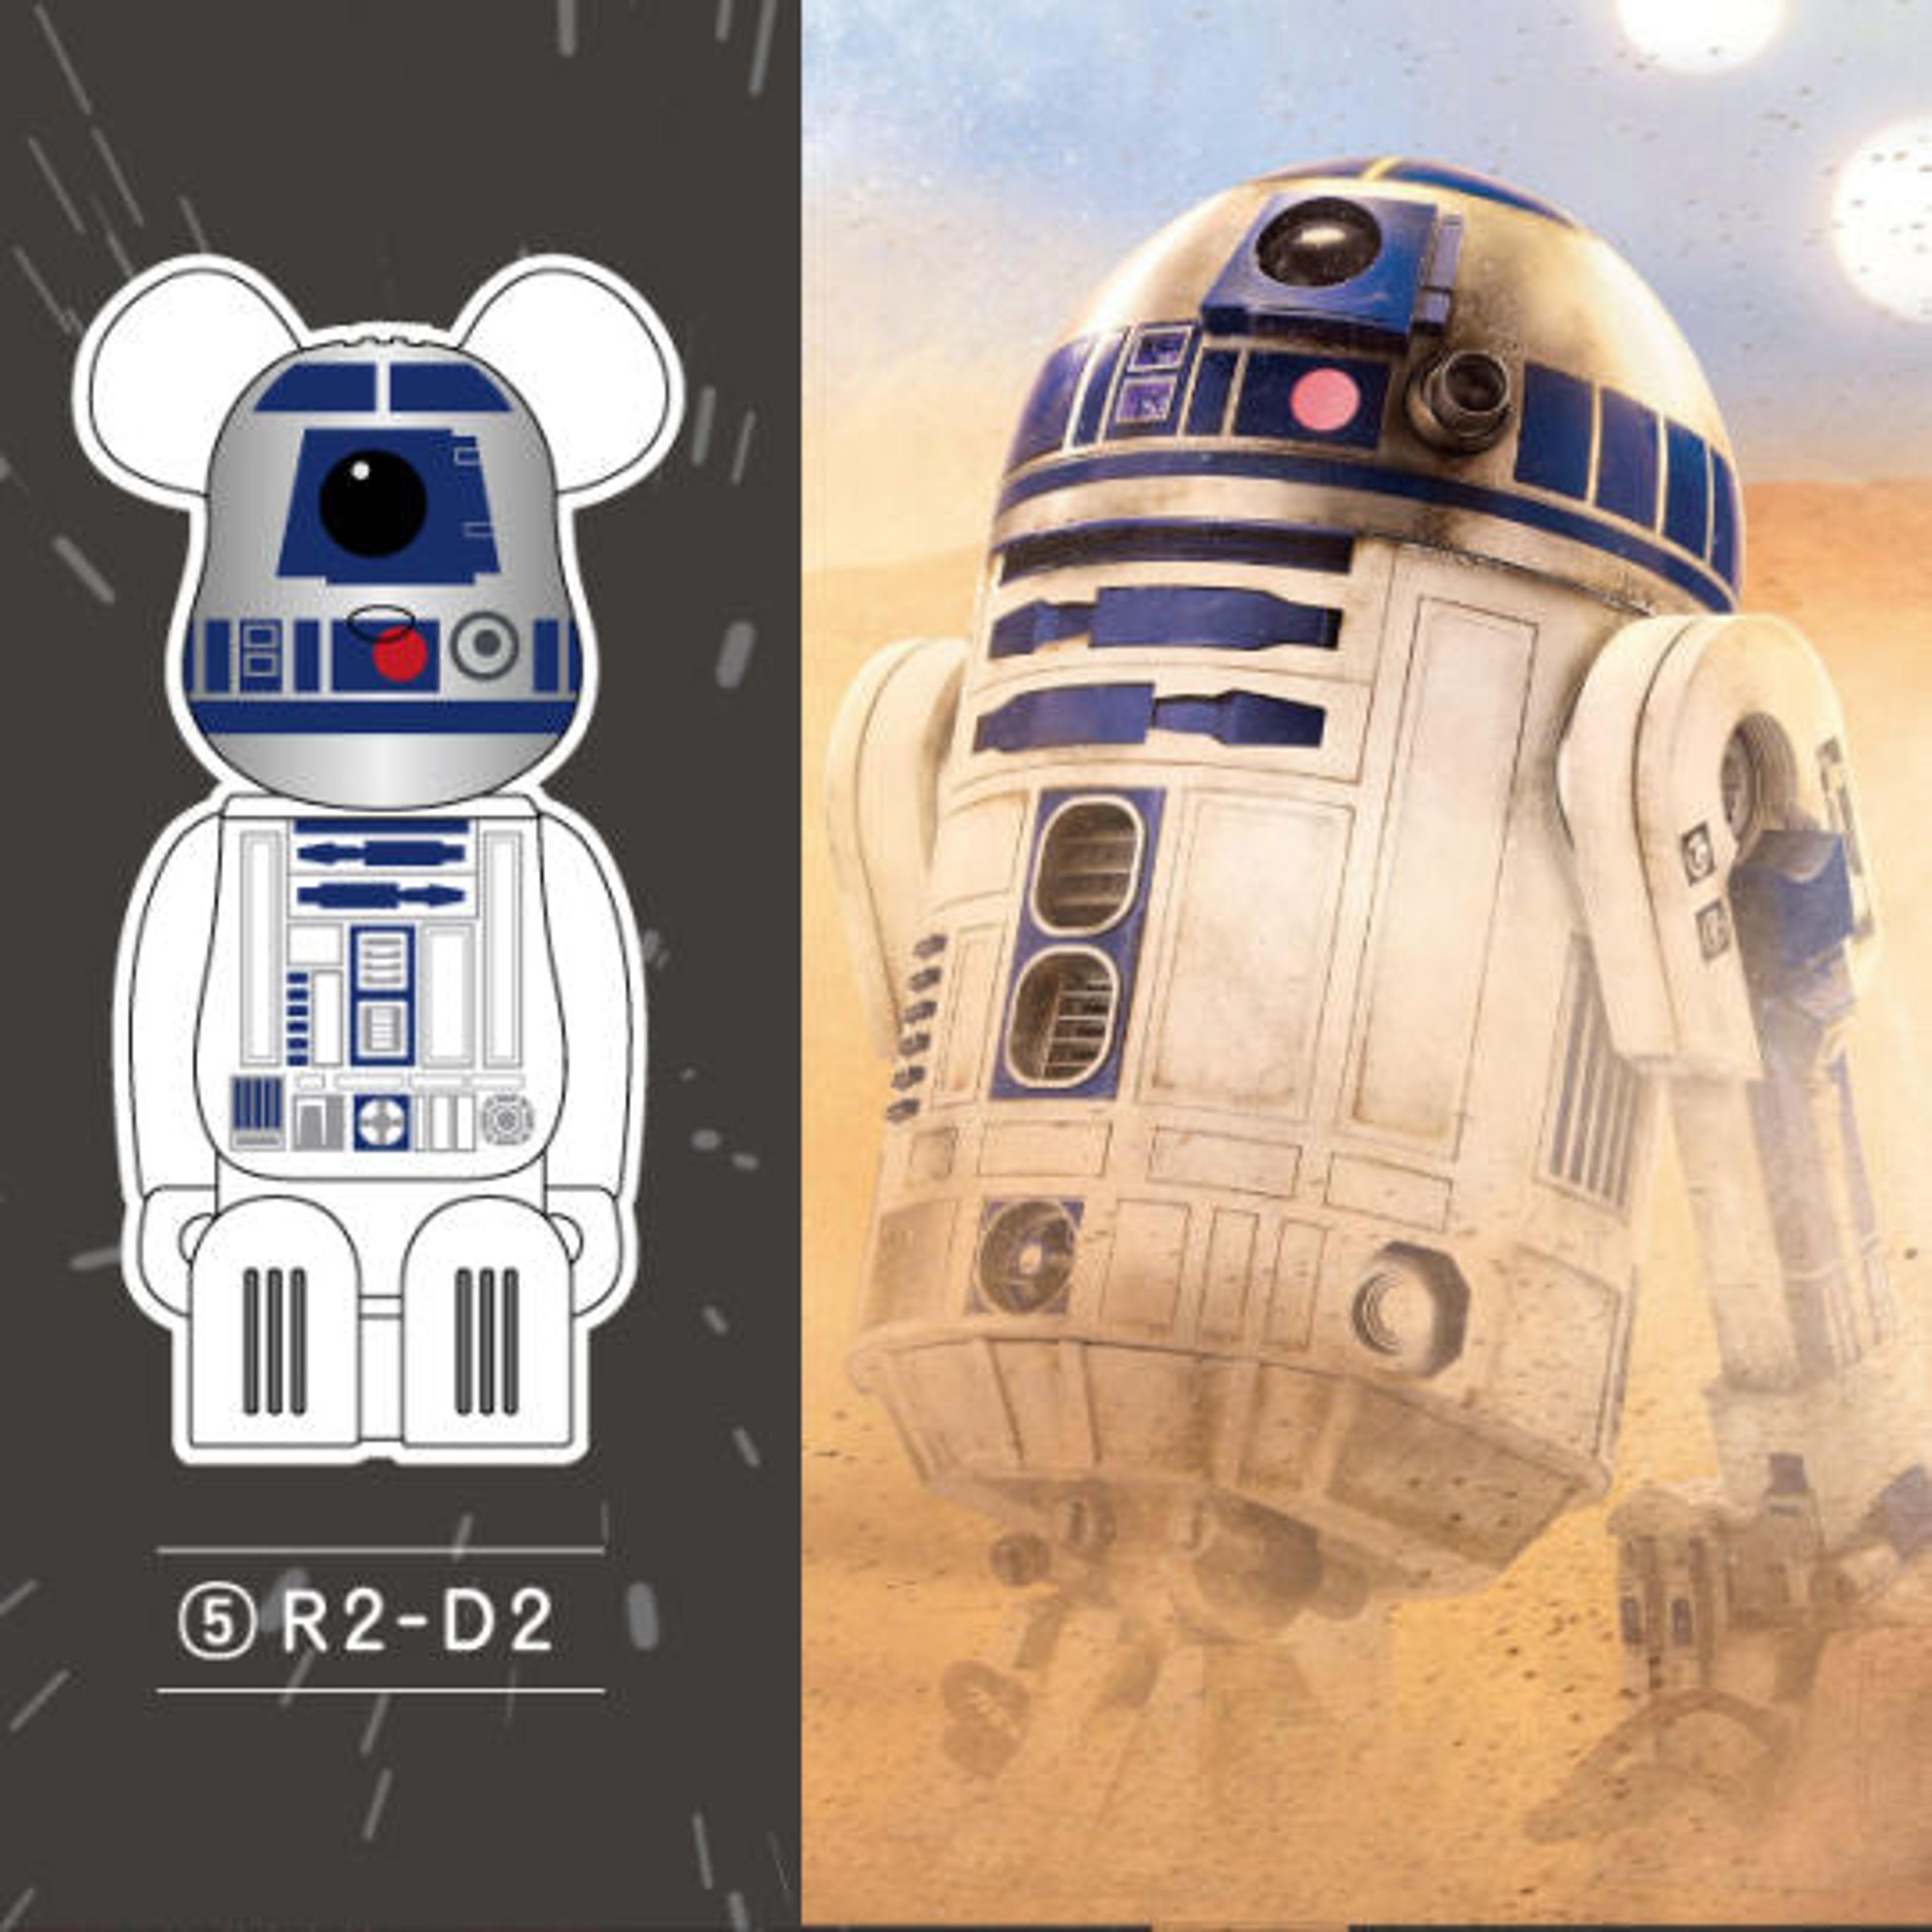 Alternate View 4 of Medicom Toy BE＠RBRICK Cleverin Star Wars 6 Piece Compete Set L